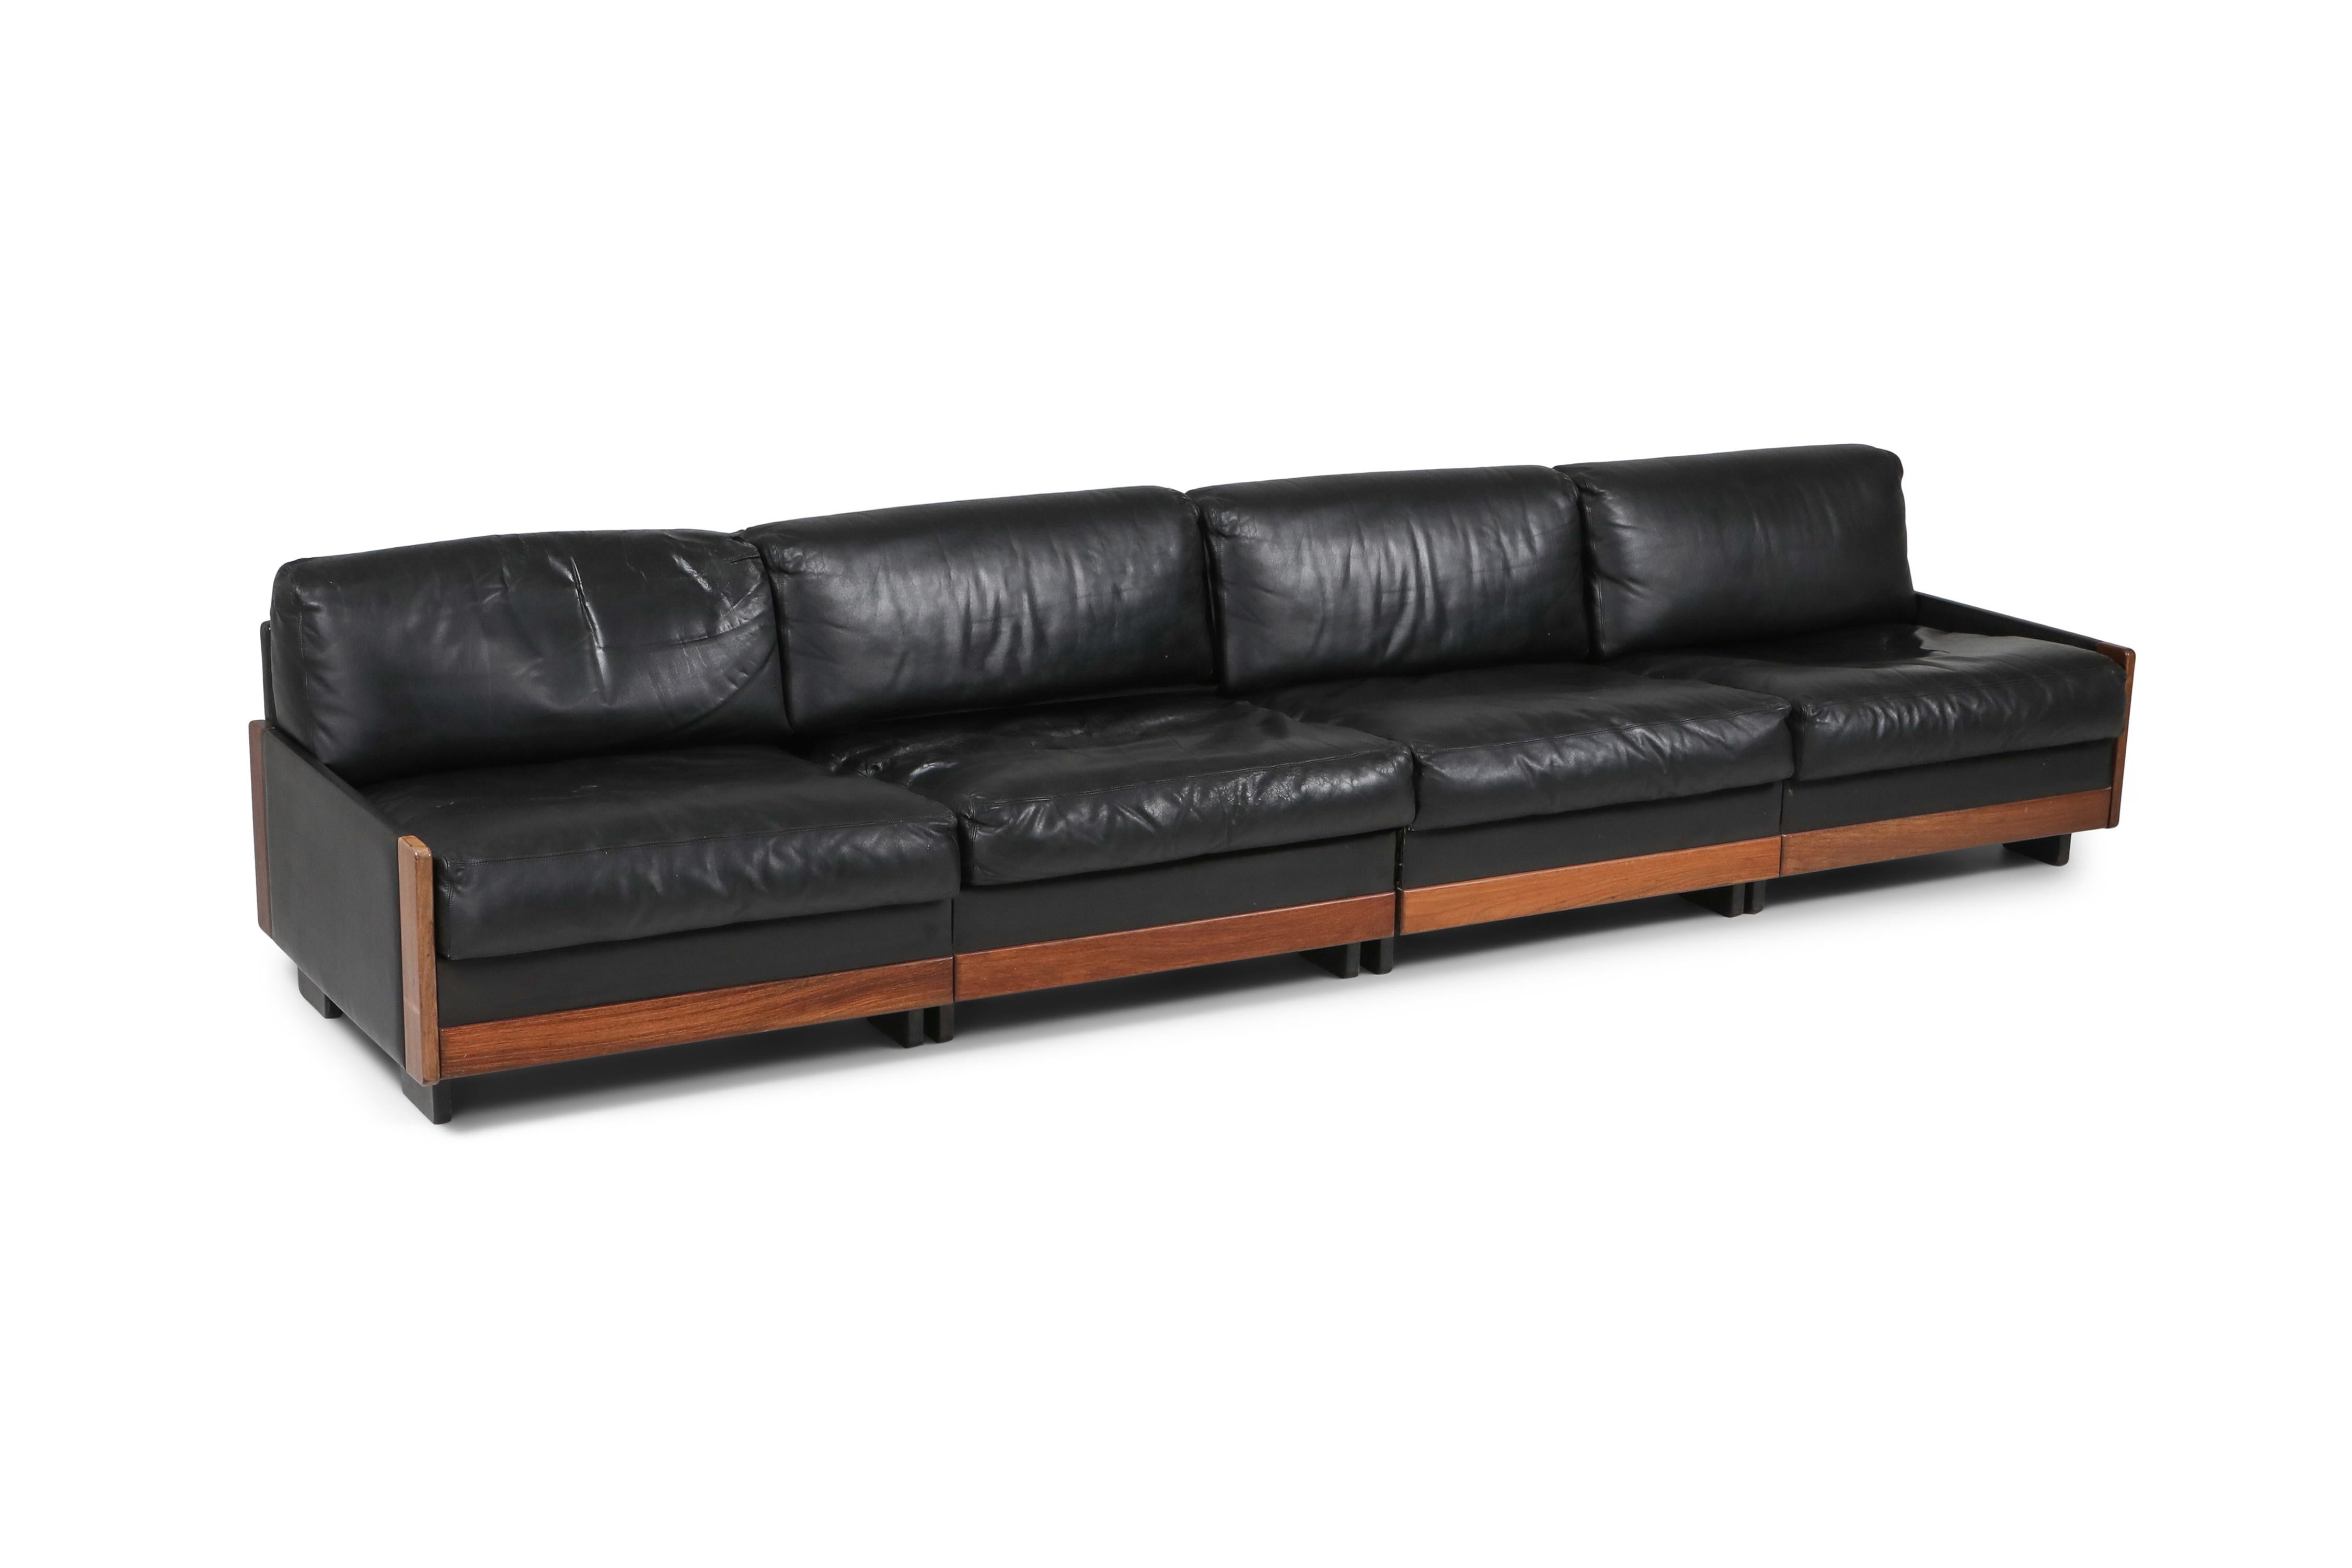 Black leather and walnut frame, model '920' couch, Afra & Tobia Scarpa, Cassina, 1970s

First edition four-seat sectional sofa produced by Figli di Amadeo Cassina
Midcentury to Postmodern piece by the famous designer duo.




 